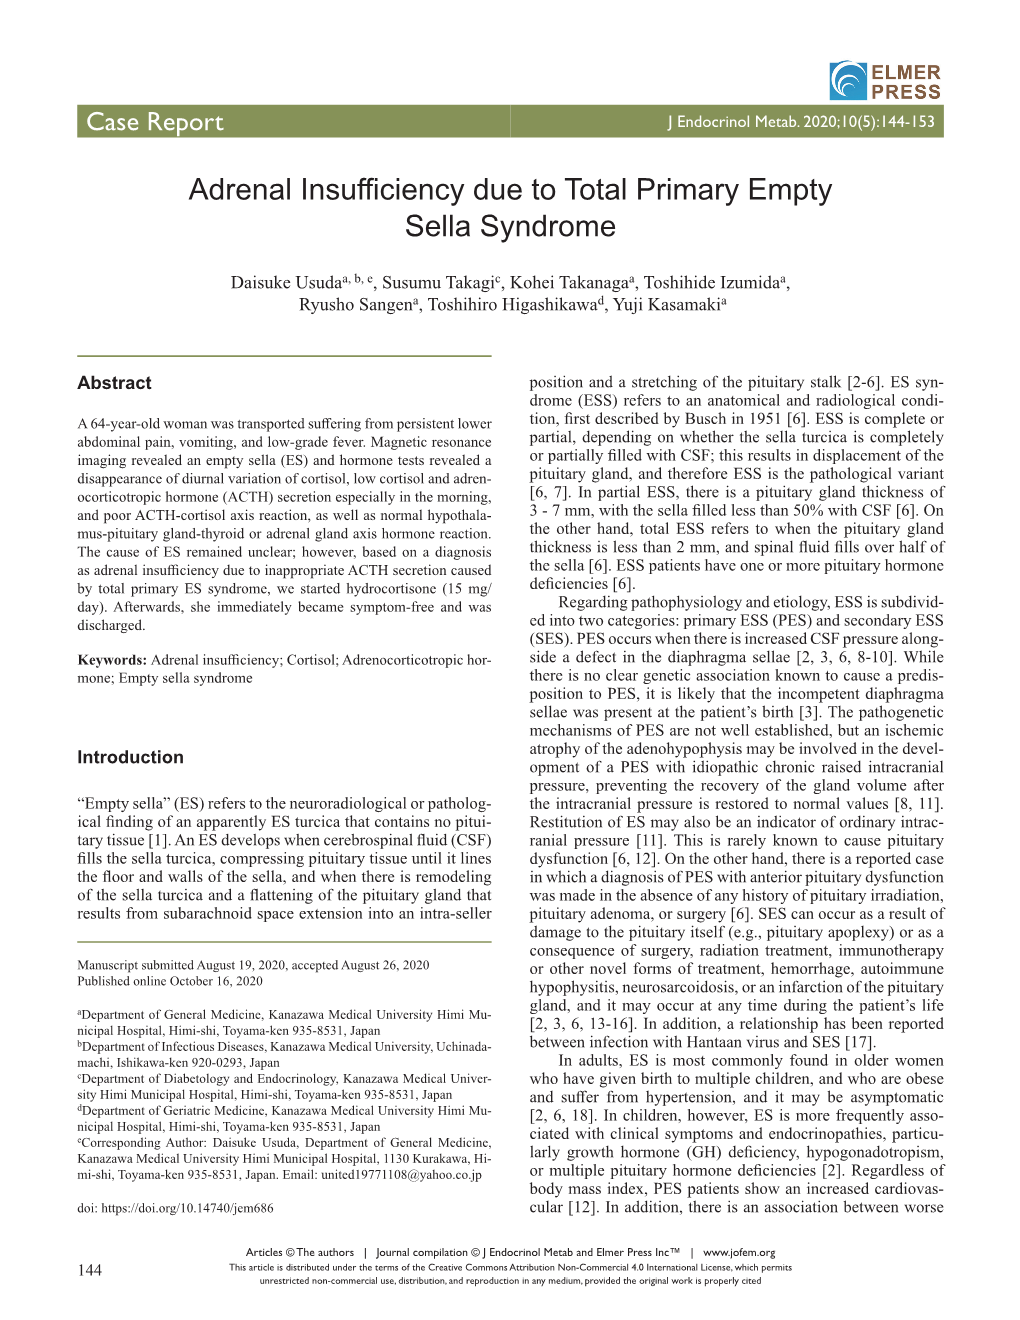 Adrenal Insufficiency Due to Total Primary Empty Sella Syndrome